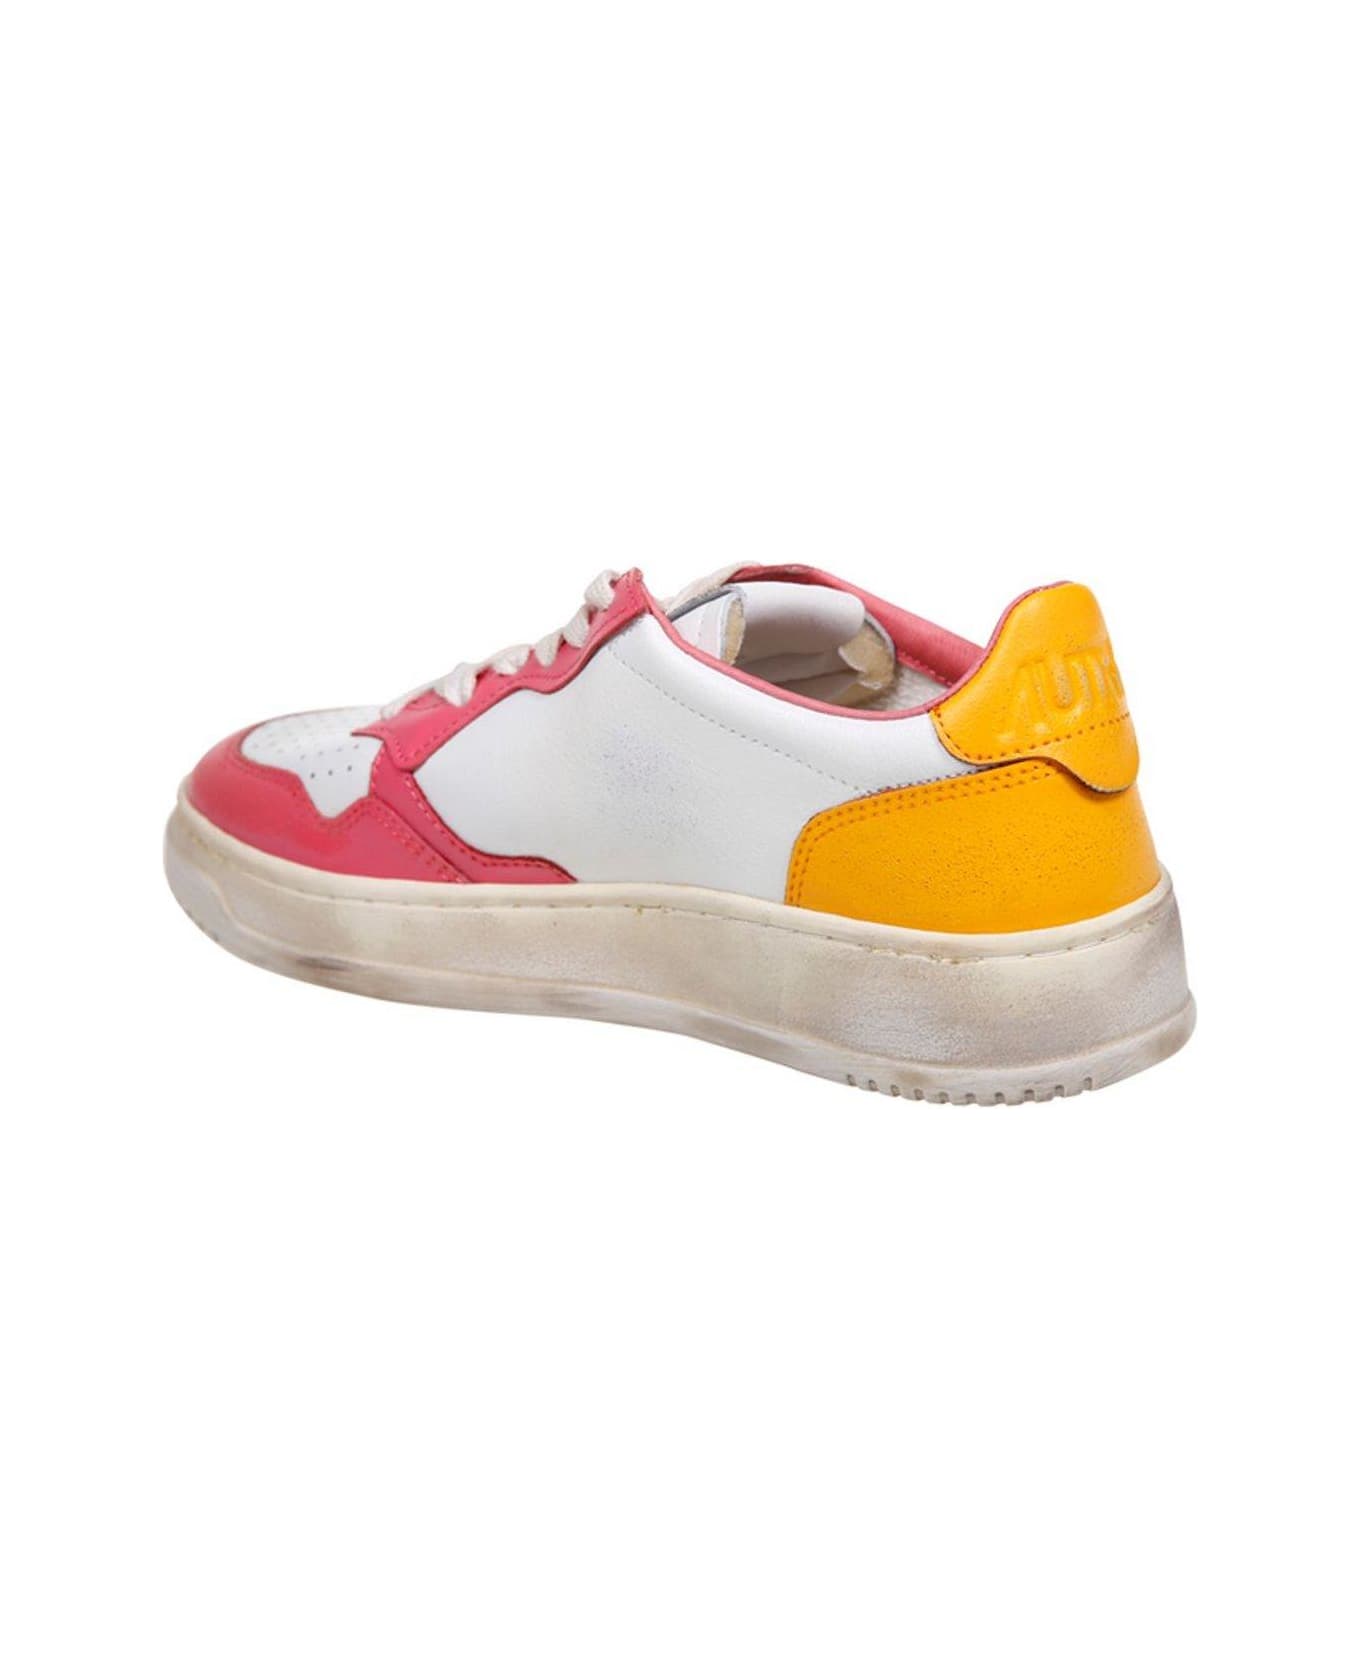 Autry Medalist Low-top Sneakers - Wht/ccor/brmarigold